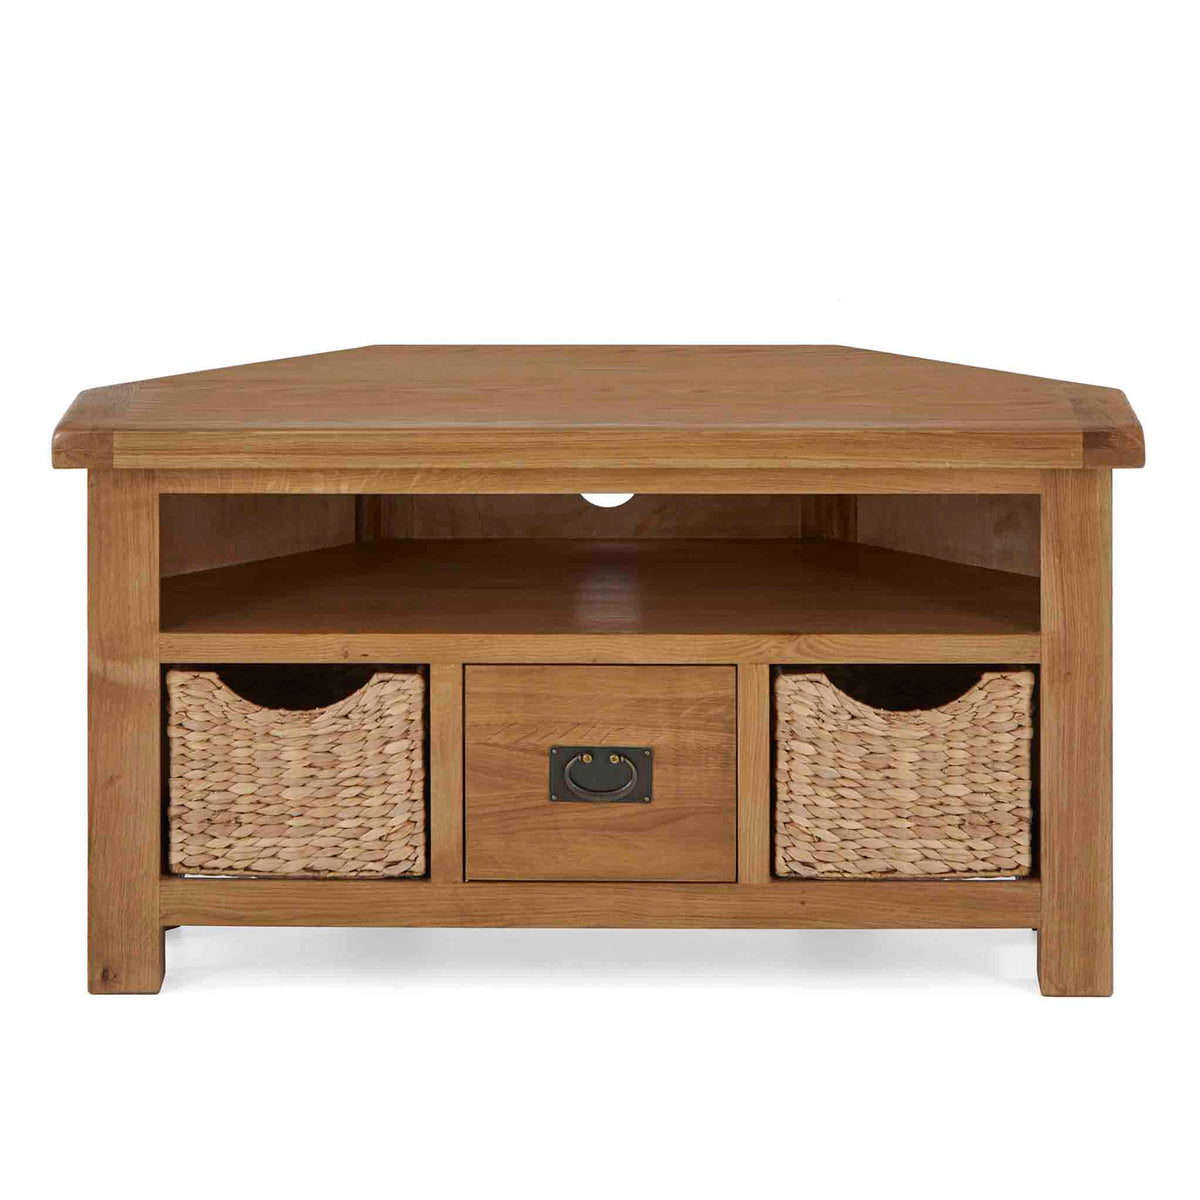 Zelah Oak Corner TV Stand with Baskets - Front view showing top